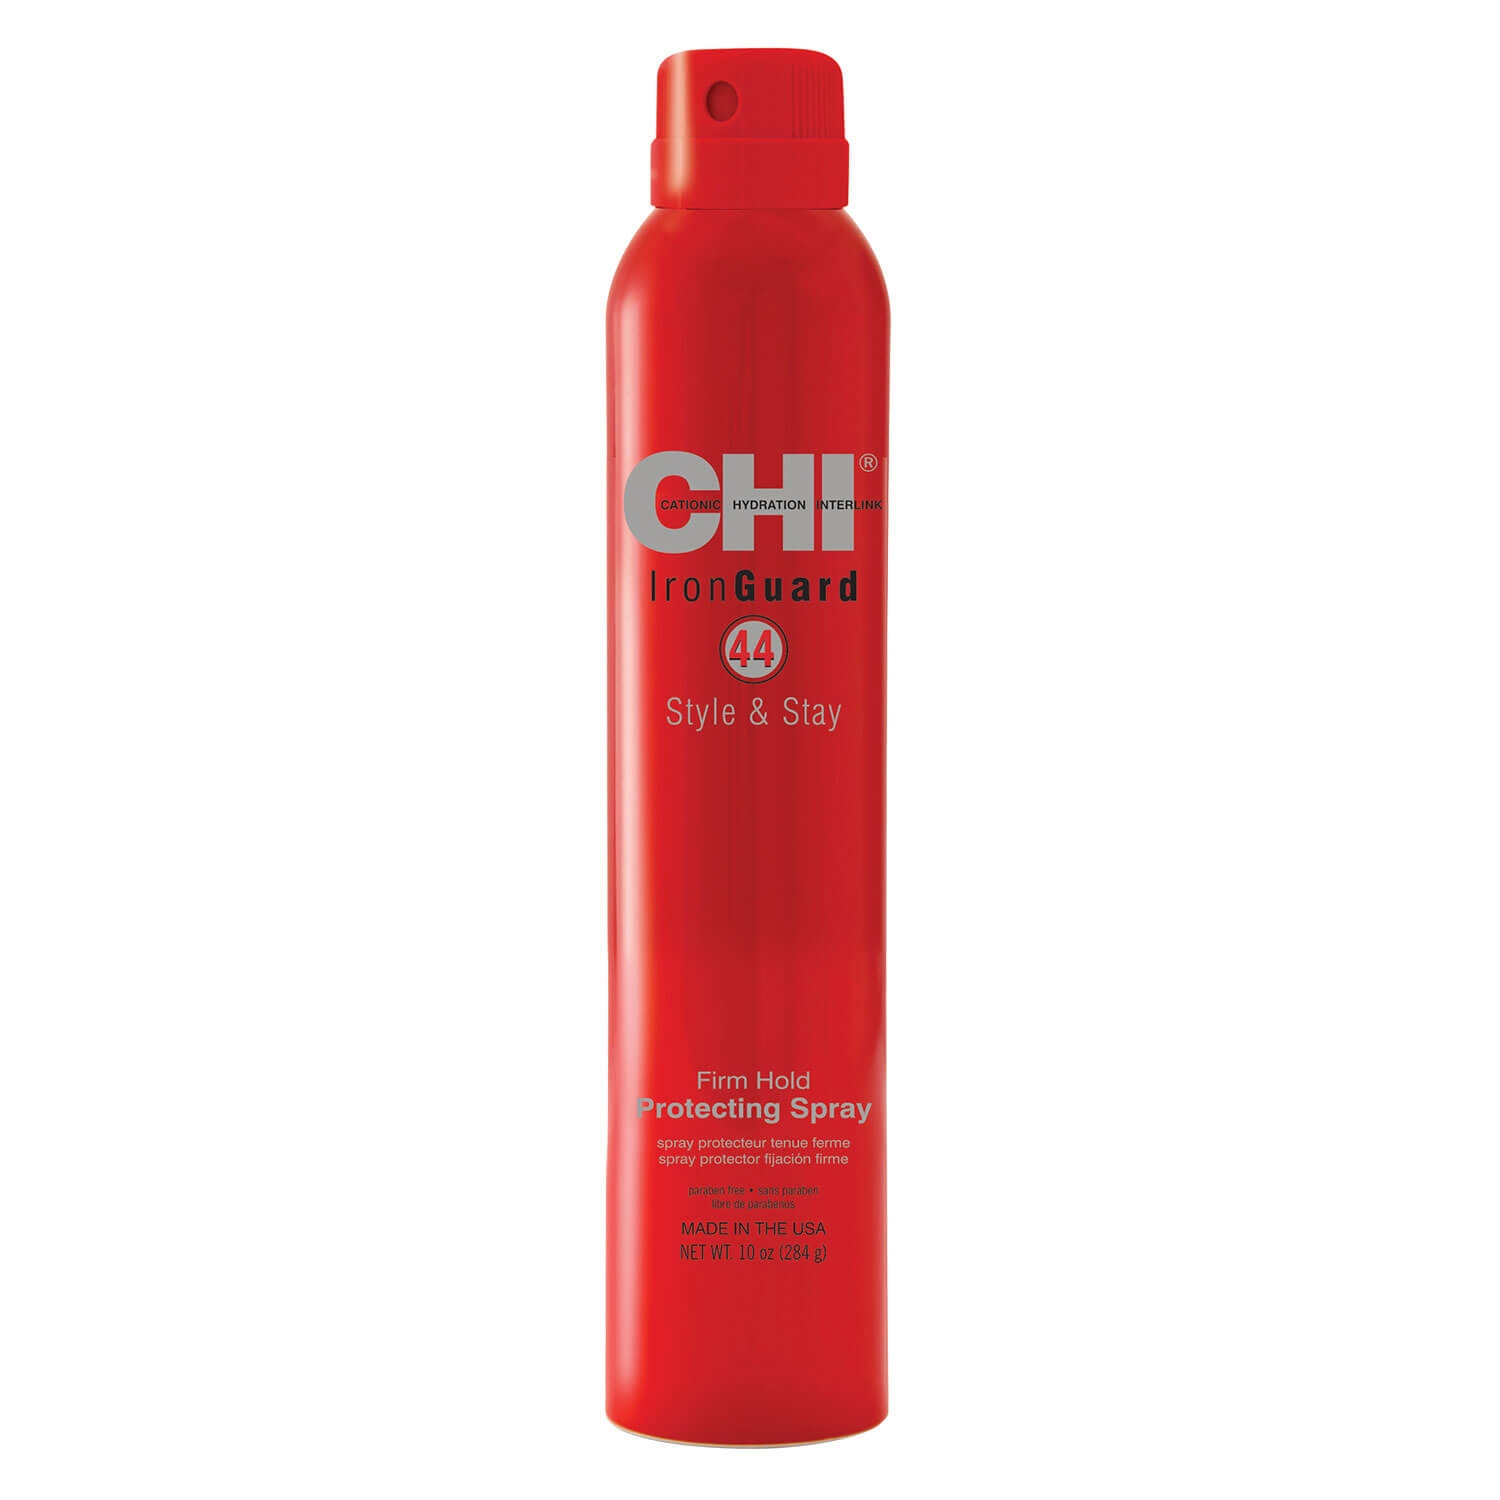 Product image from CHI 44 Iron Guard - Style & Stay Firm Hold Protecting Spray